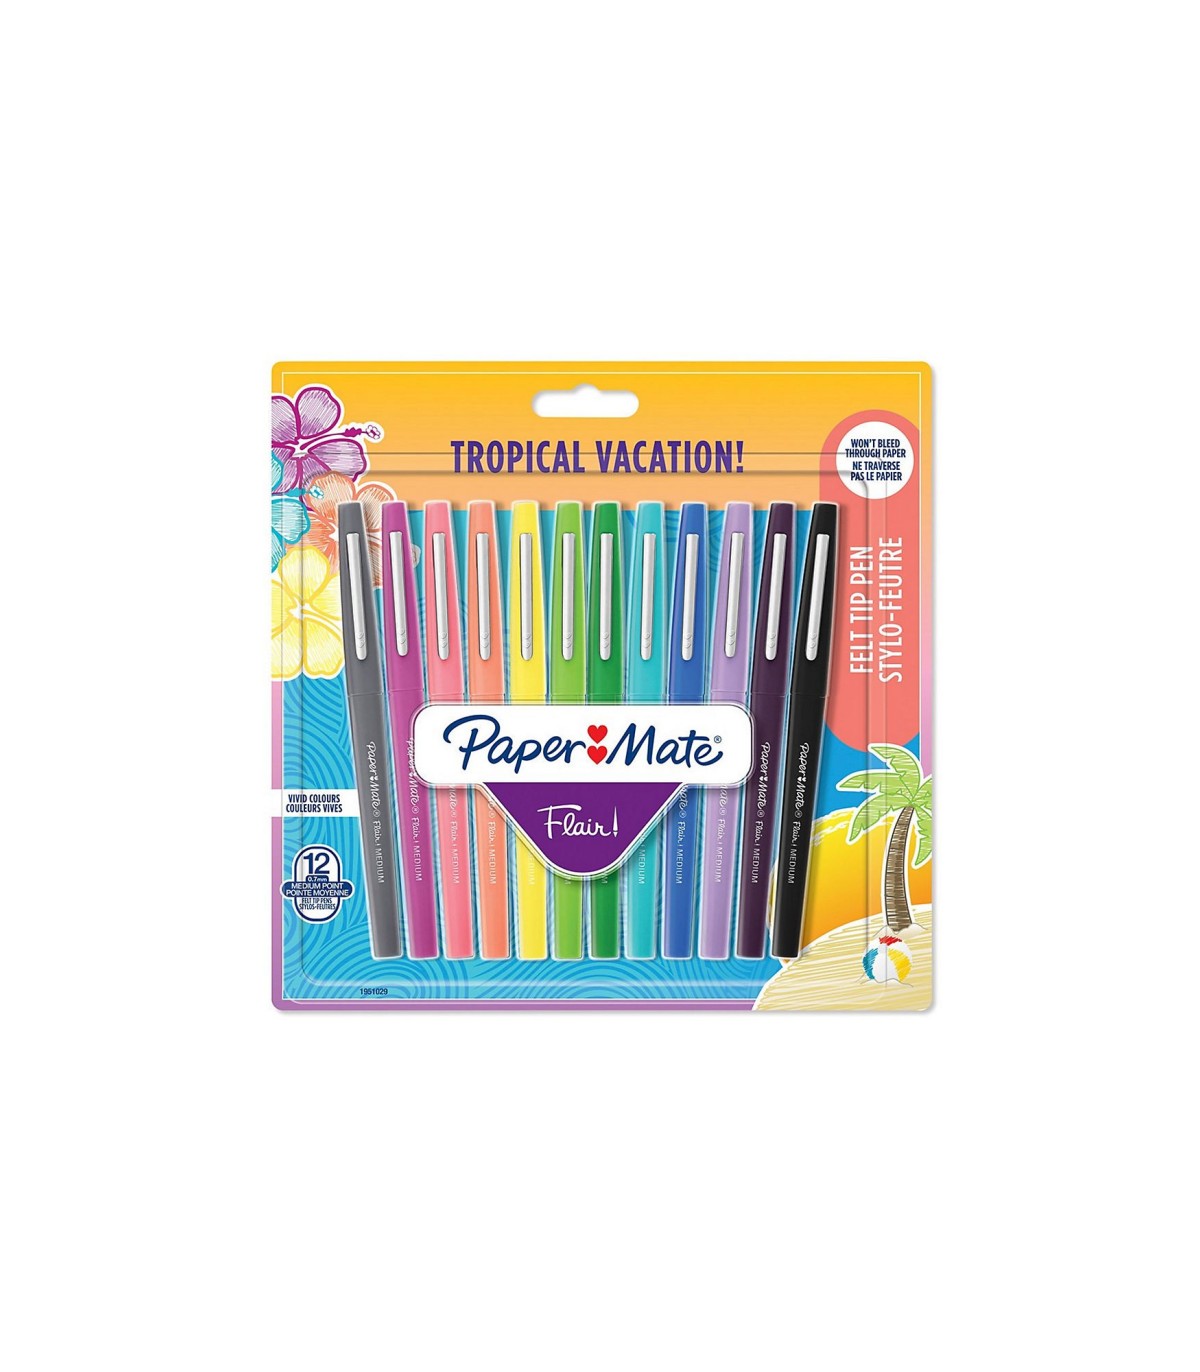 Paper Mate Flair Tropical Vacation - 12 Felt Tip Pens - Assorted